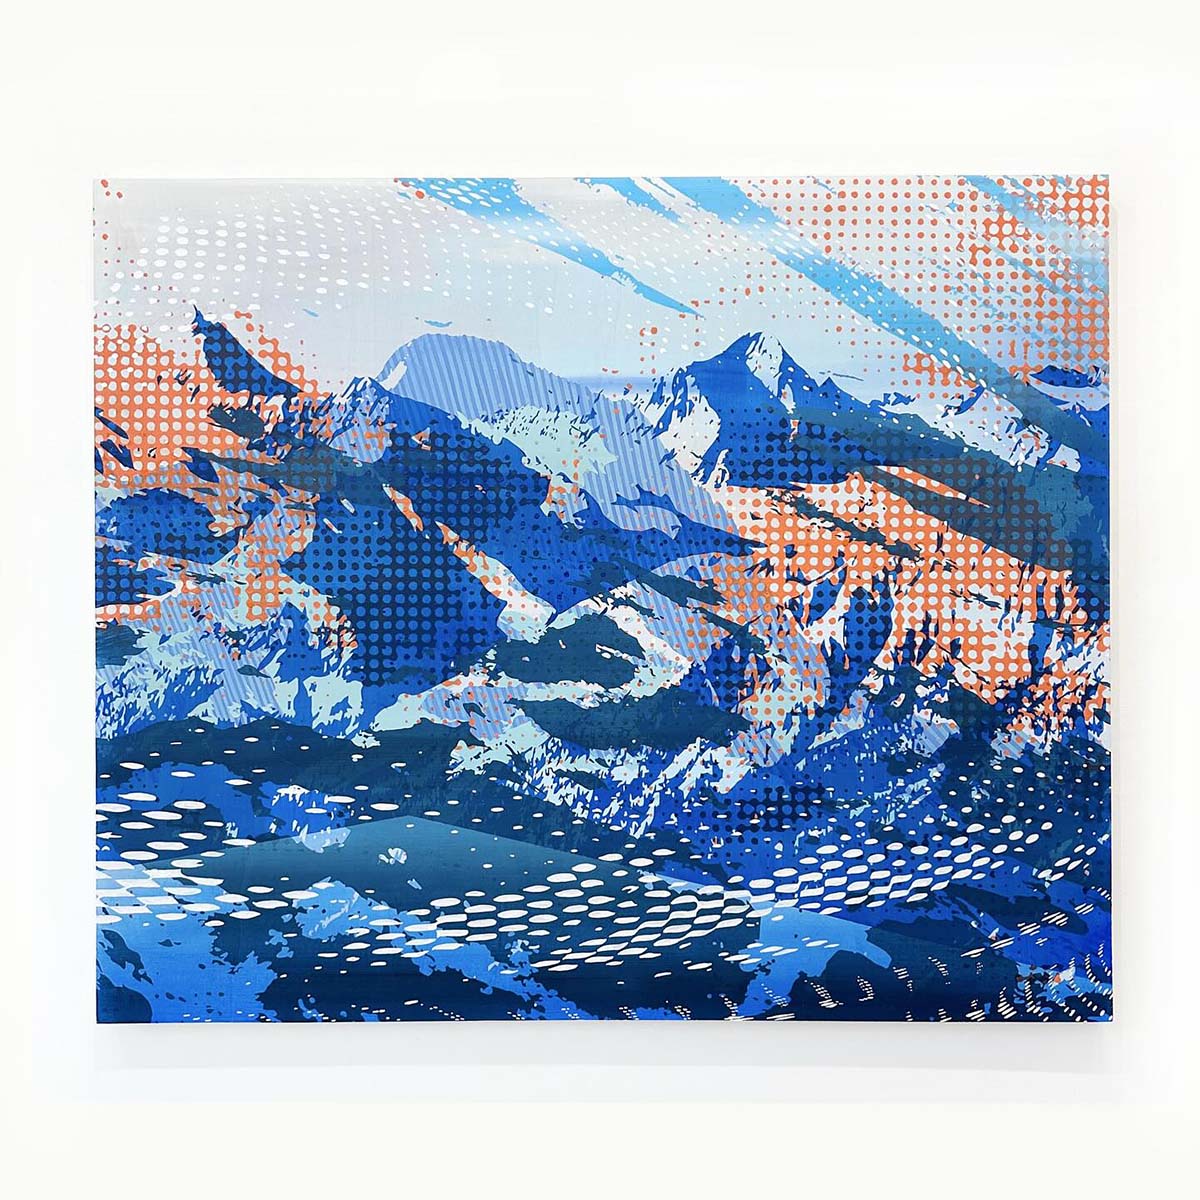 Image of multi-layered art piece, ‘Our Blue Sierras Shone Serene’, by Emily Moore.